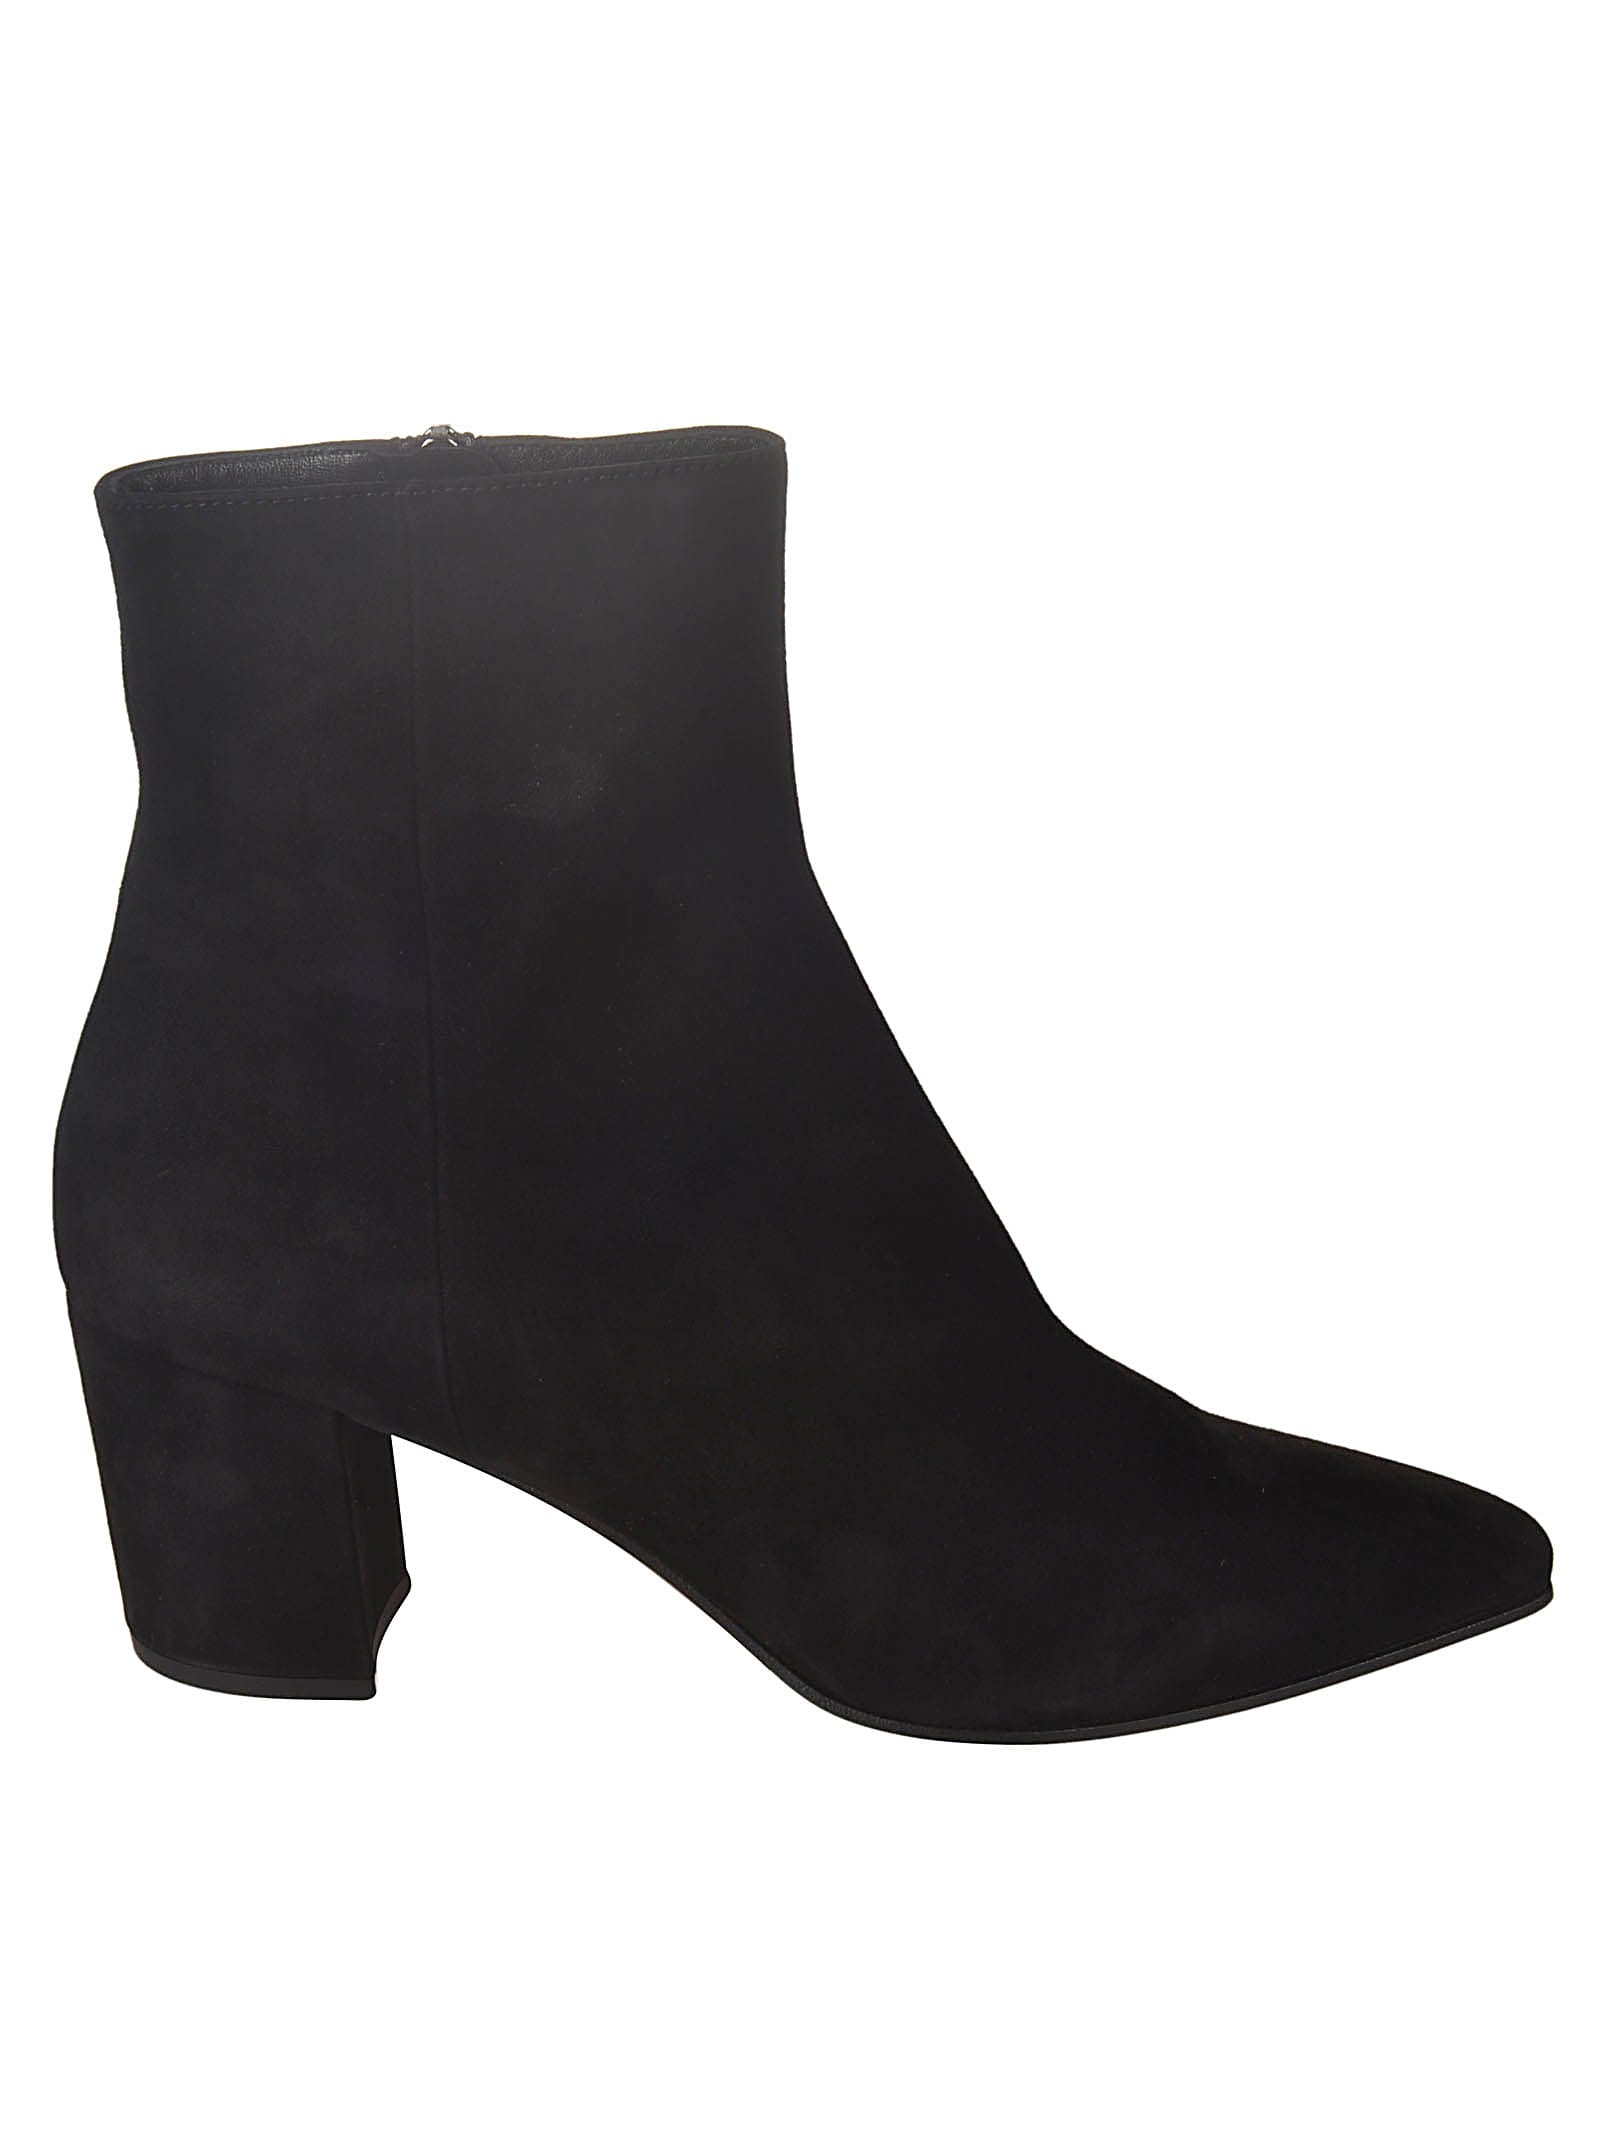 Prada Side-zipped Ankle Boots